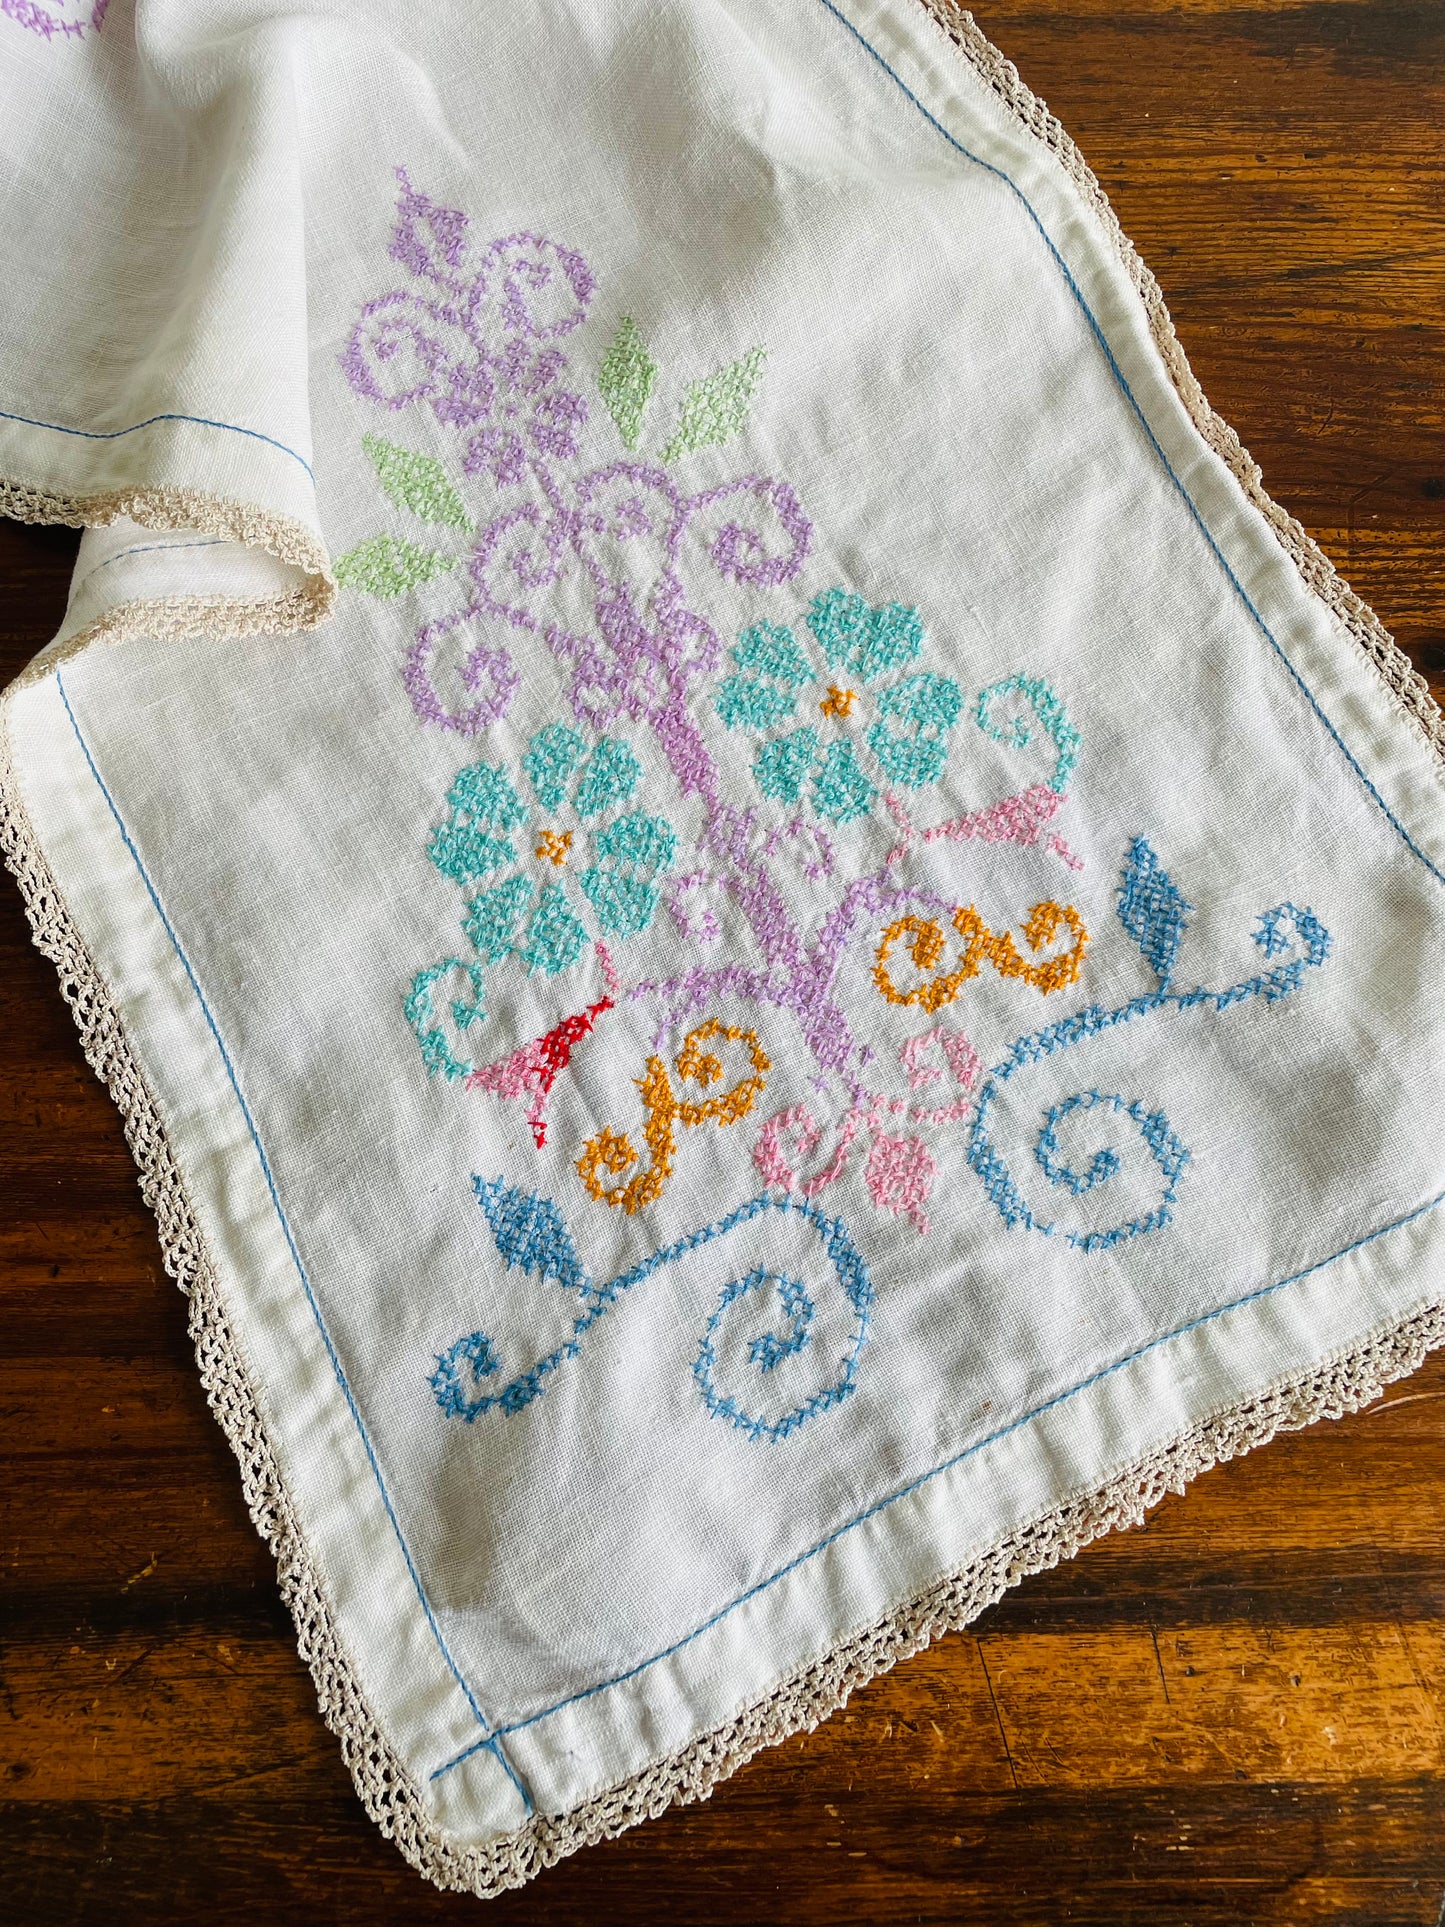 Linen Table Runner or Display Towel with Embroidered Floral Design